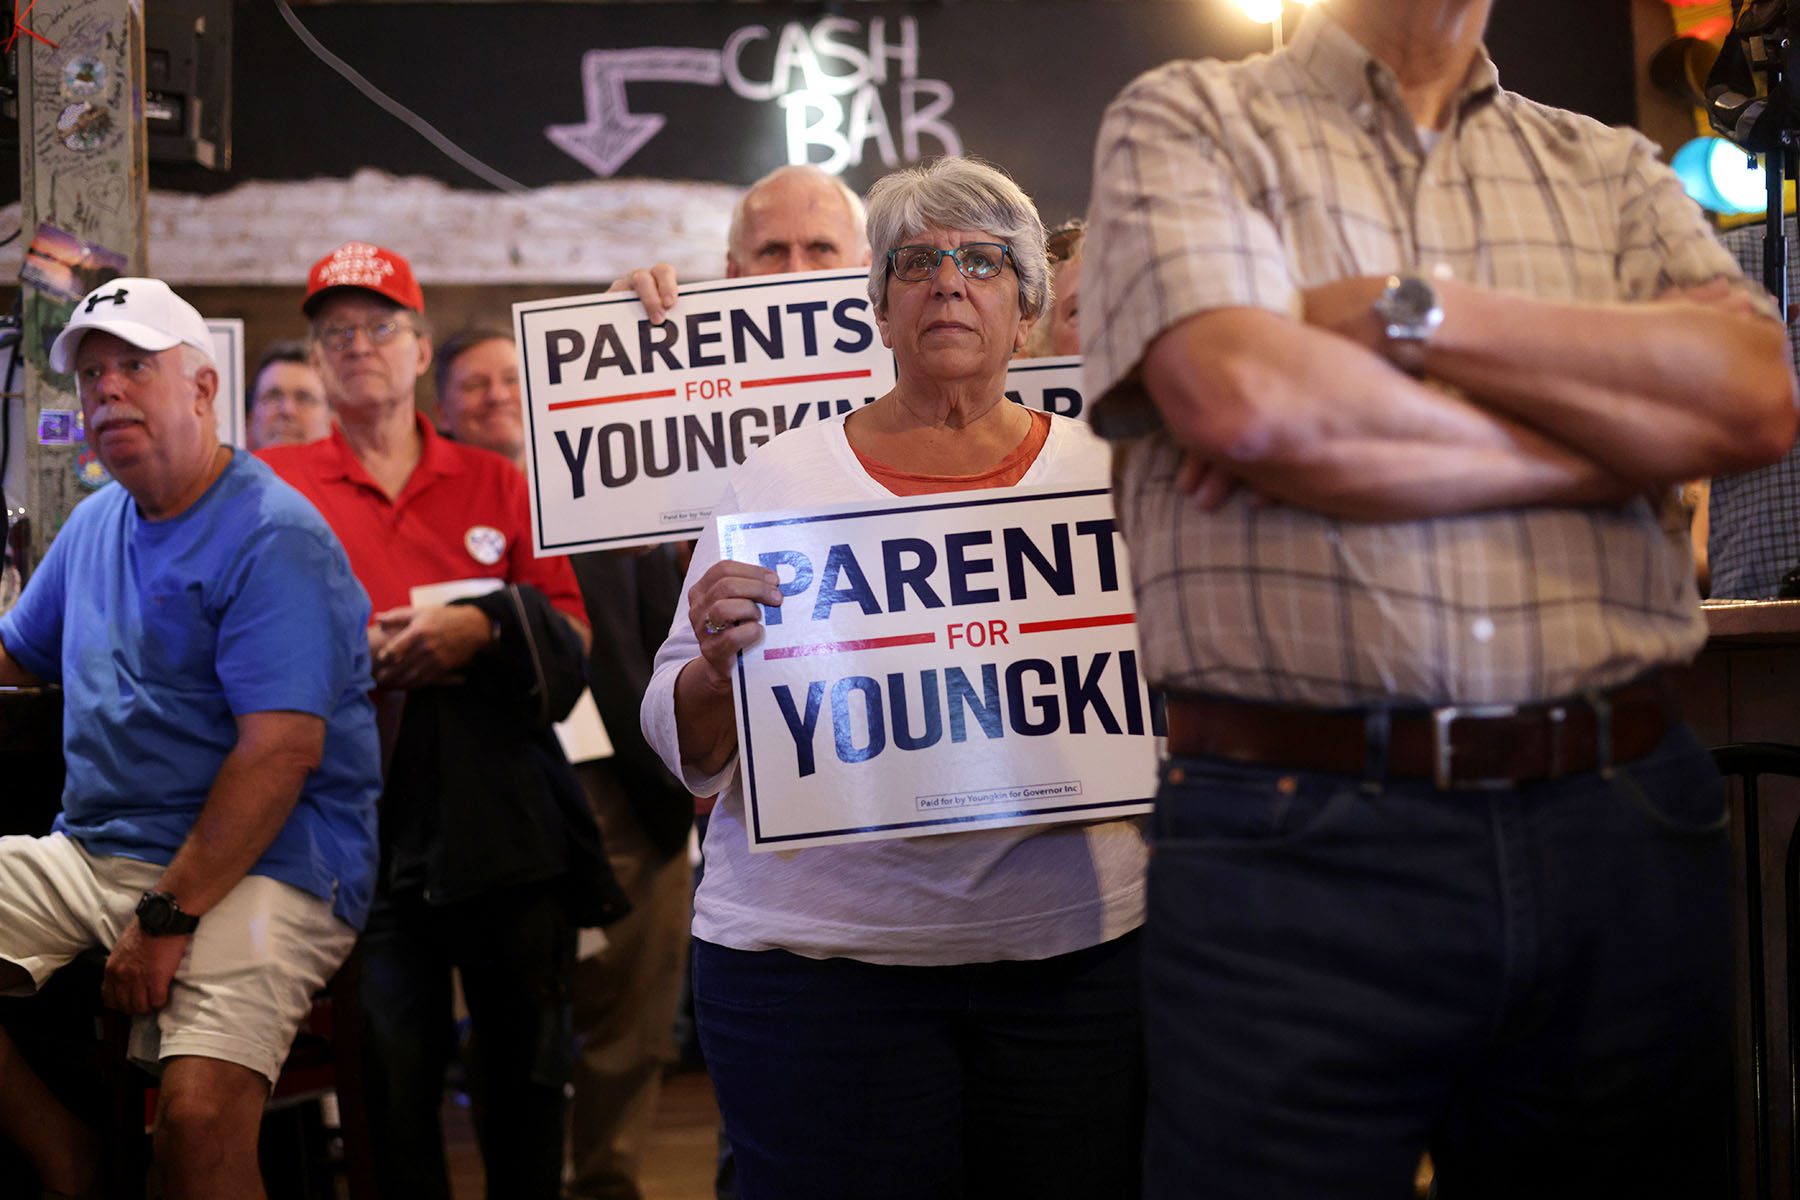 Voters listen as Glenn Youngkin speaks during a rally. Some participants hold signs that read "Parents for Youngkin."